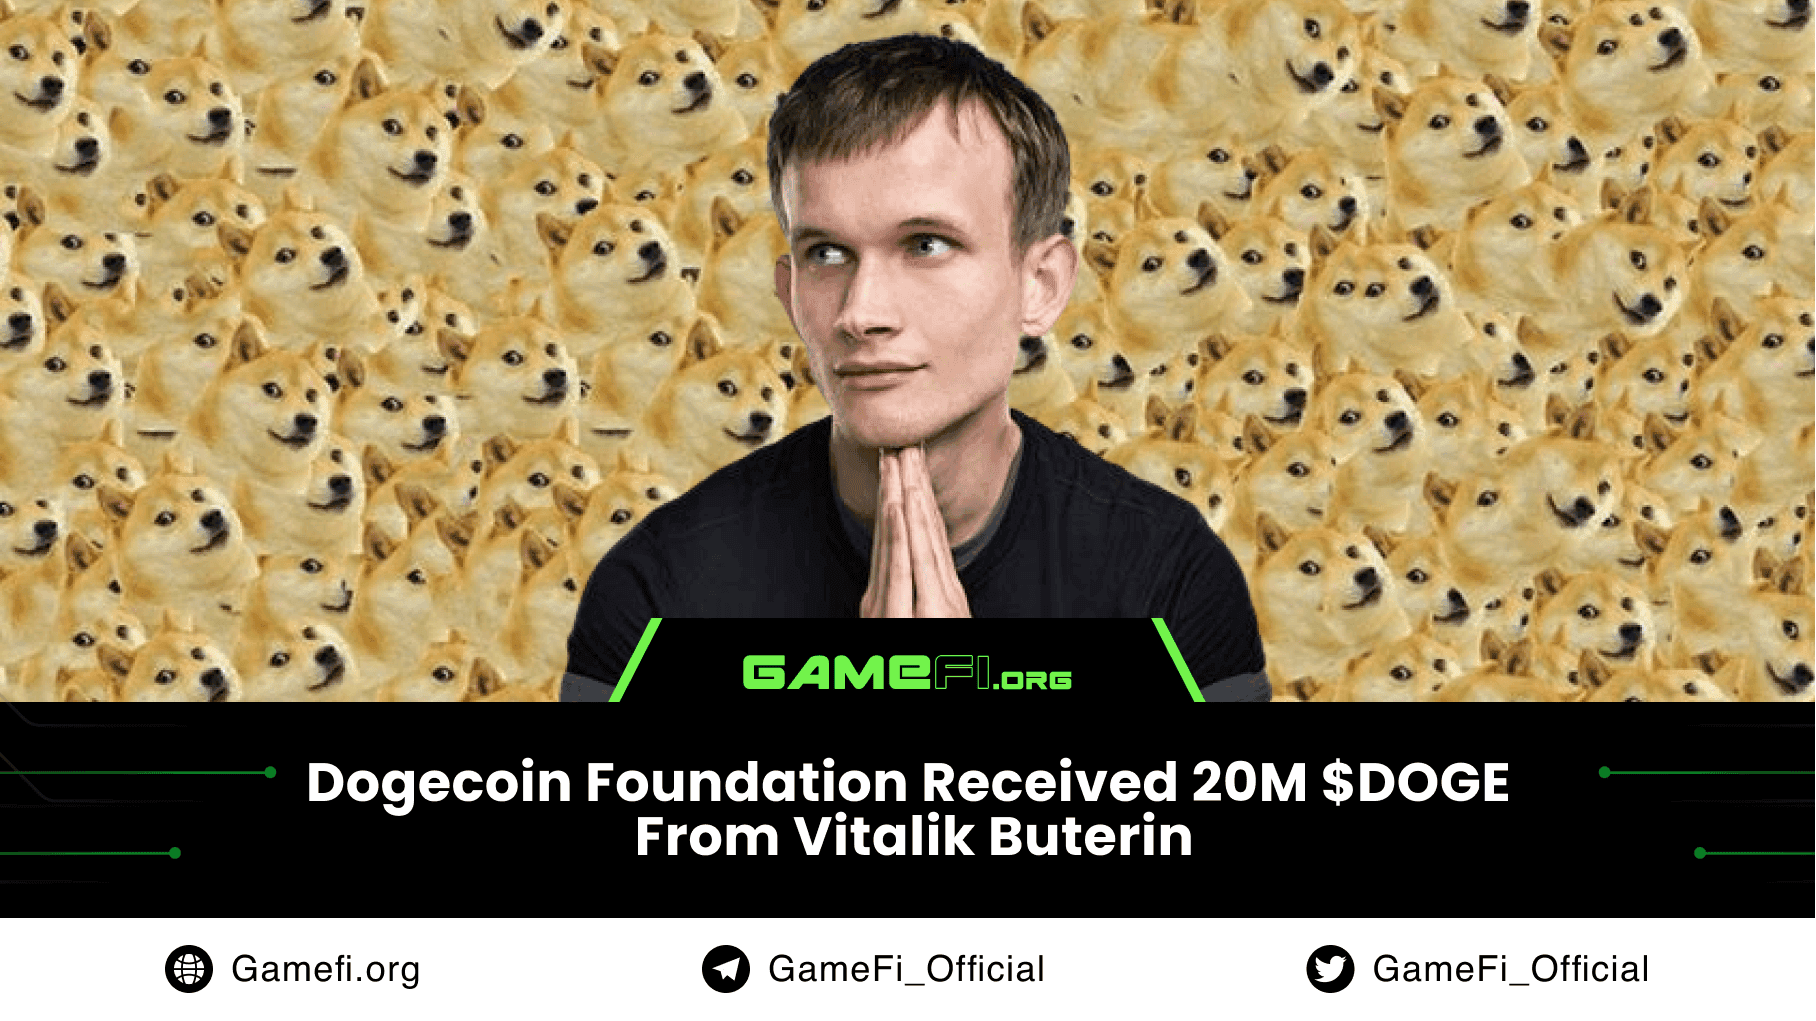 Dogecoin Foundation Received 20M $DOGE From Vitalik Buterin